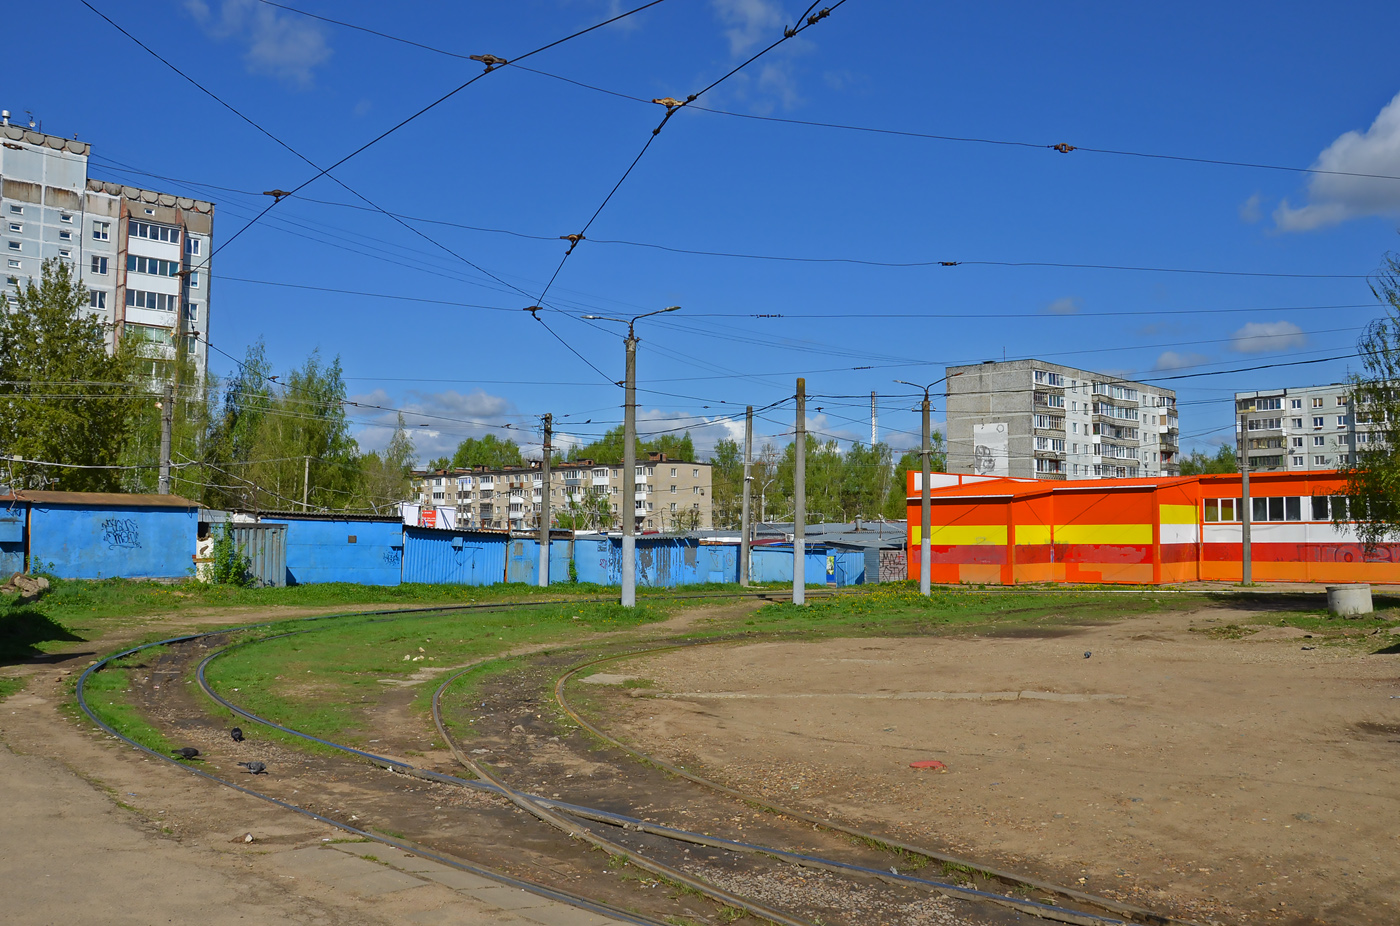 Smolensk — Tramway lines, ifrastructure and final stations